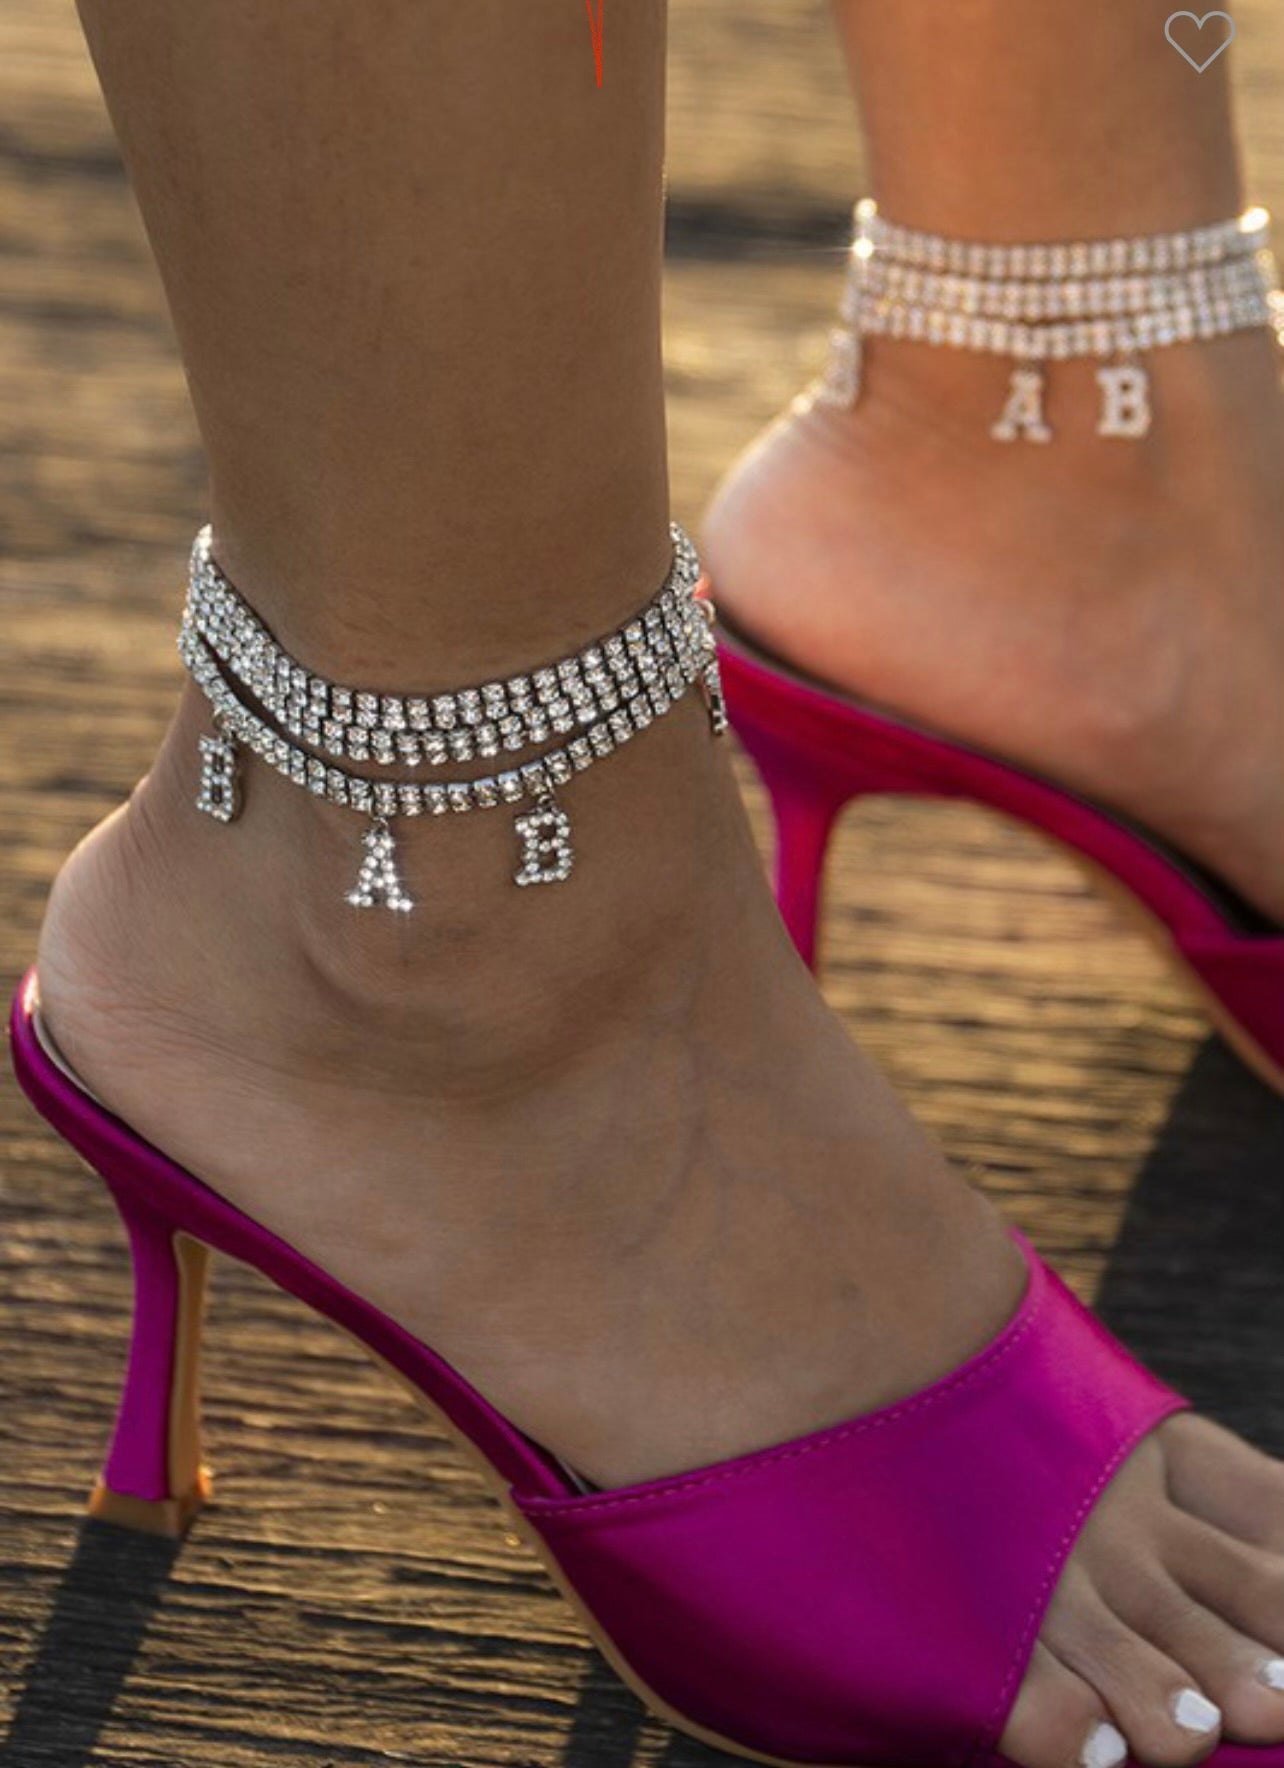 “Baby” Anklet